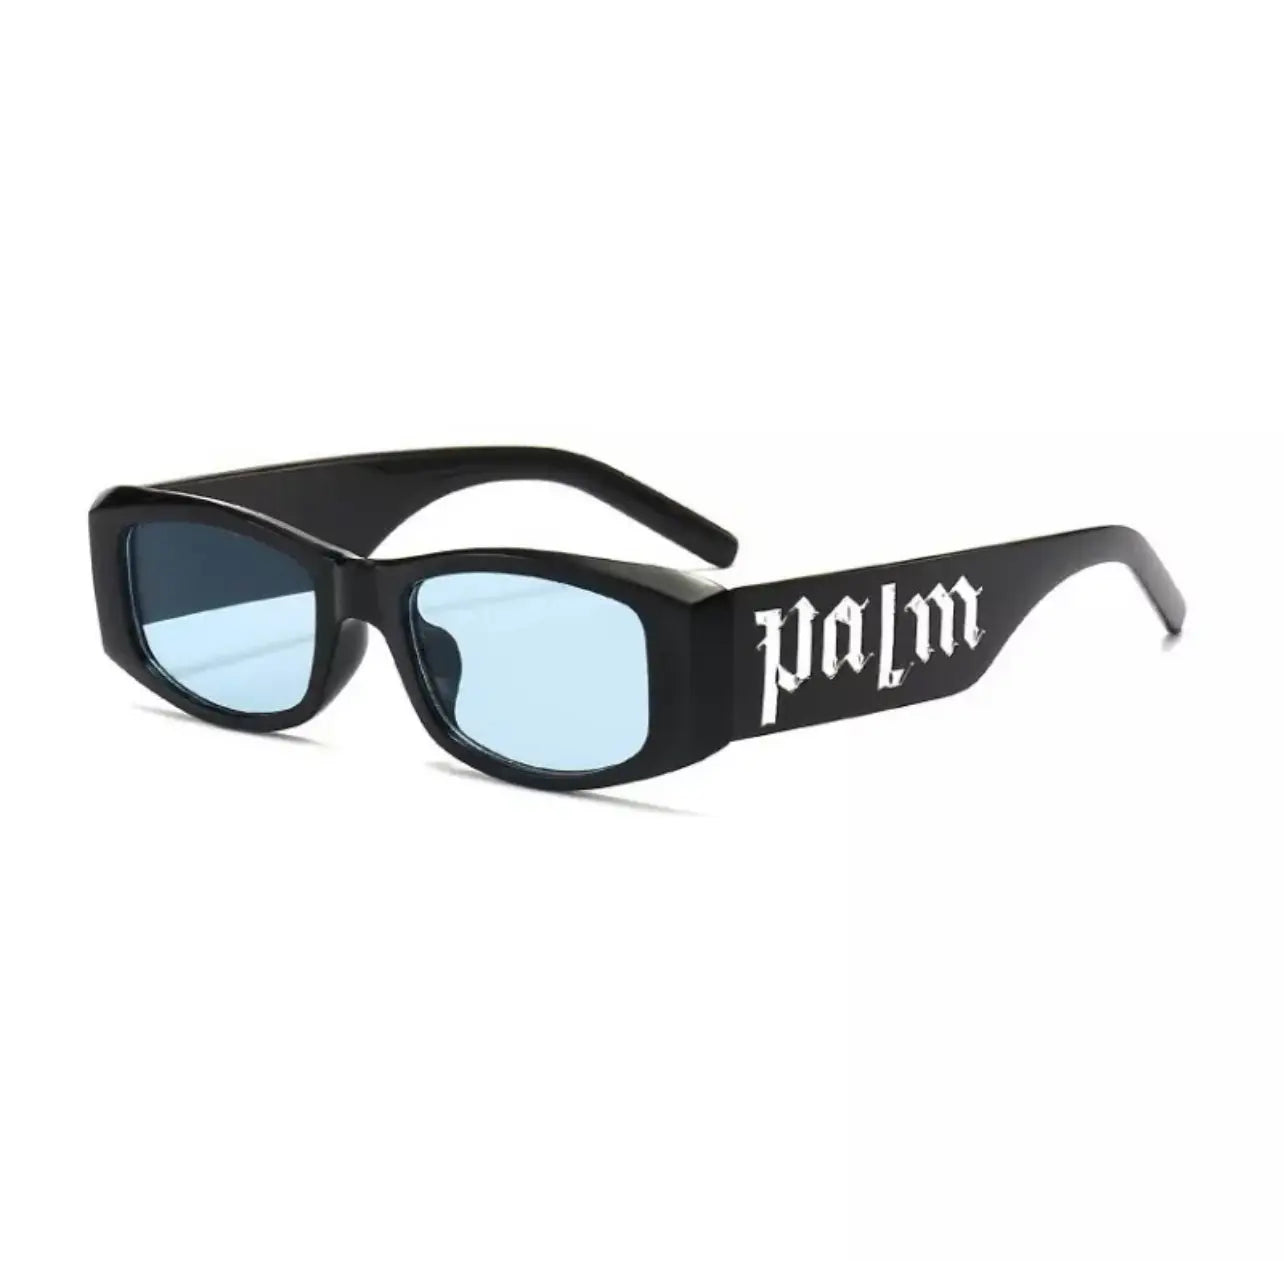 a pair of black palm angels sunglasses with the word'palm'on them.